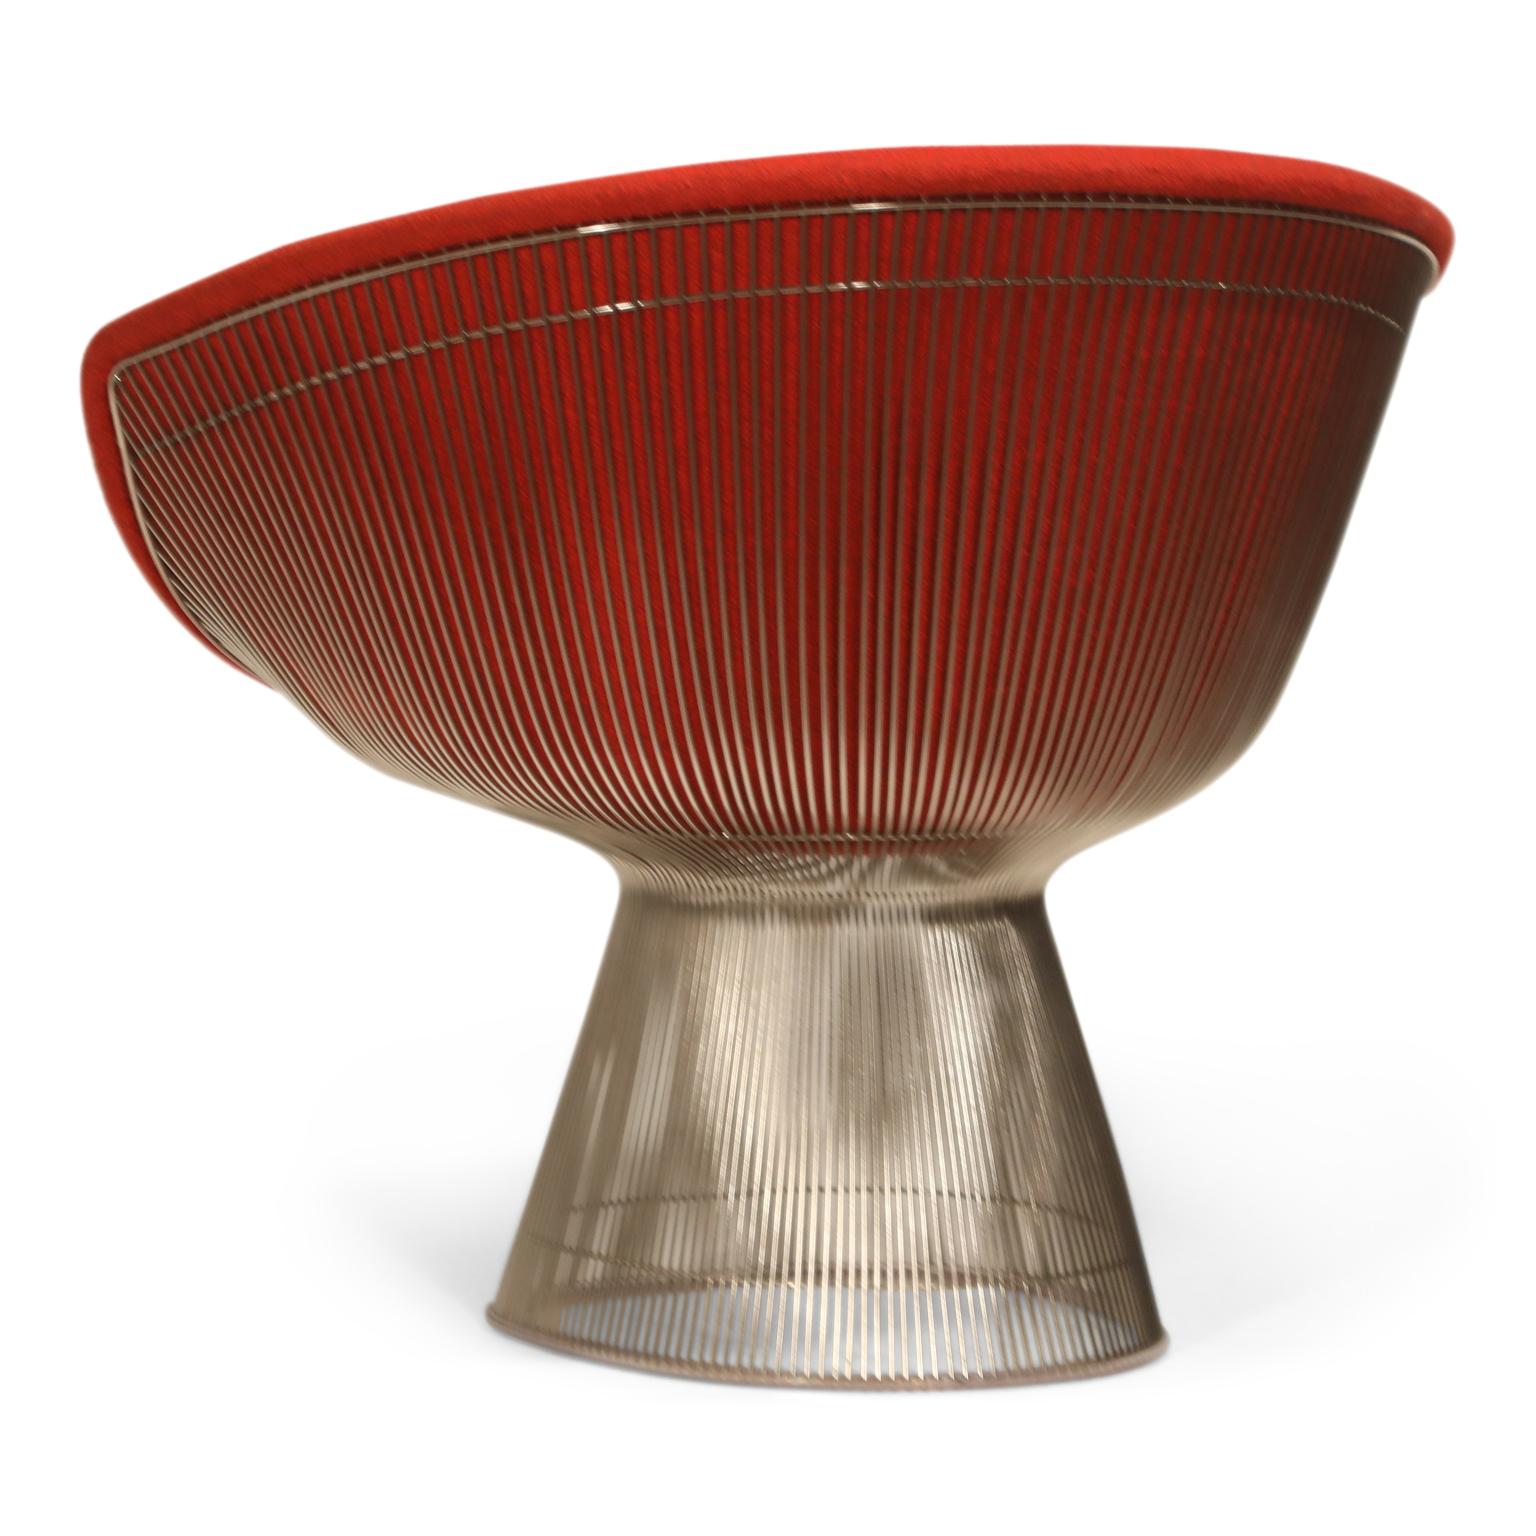 Contemporary Warren Platner for Knoll Lounge Chairs in Red Wool Boucle